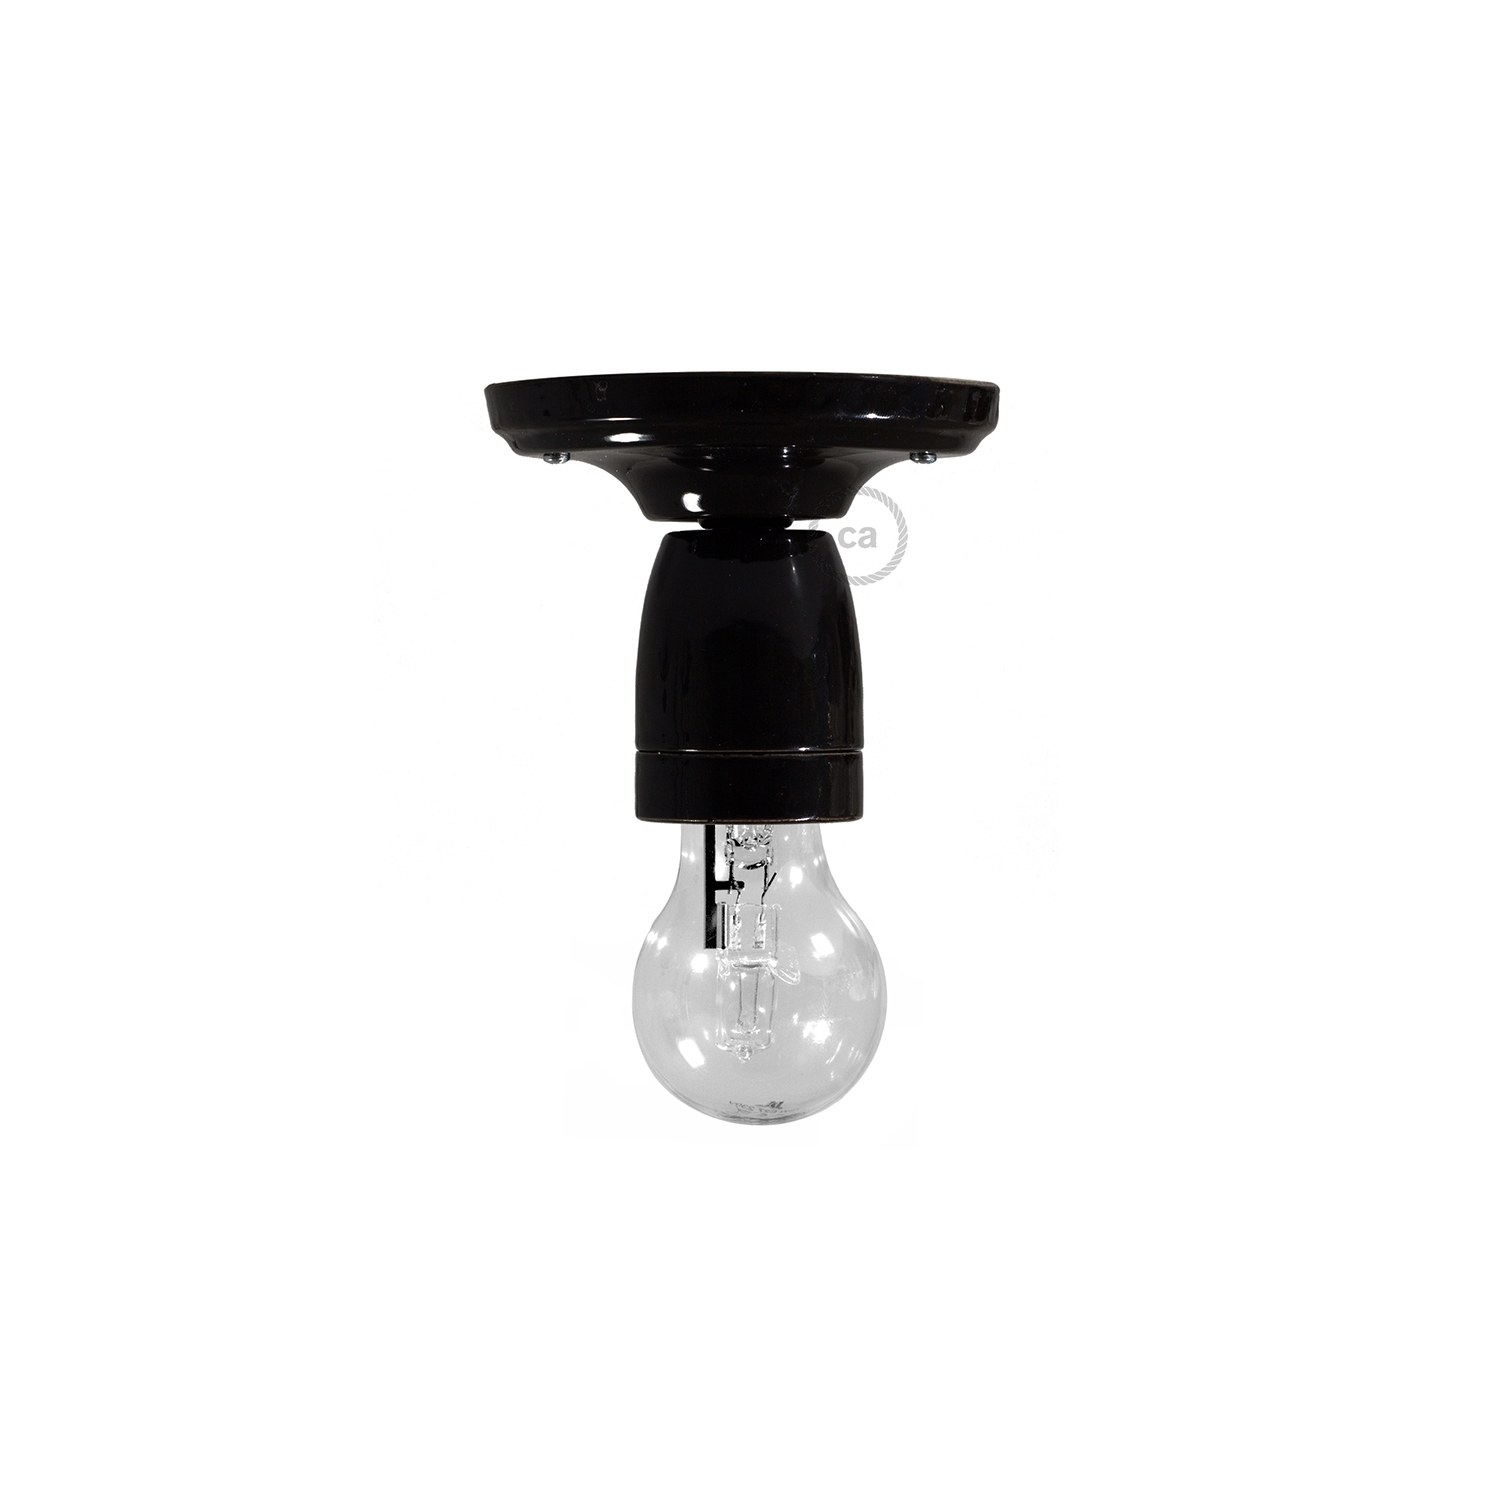 Fermaluce Classic, the wall or ceiling light source in black porcelain.